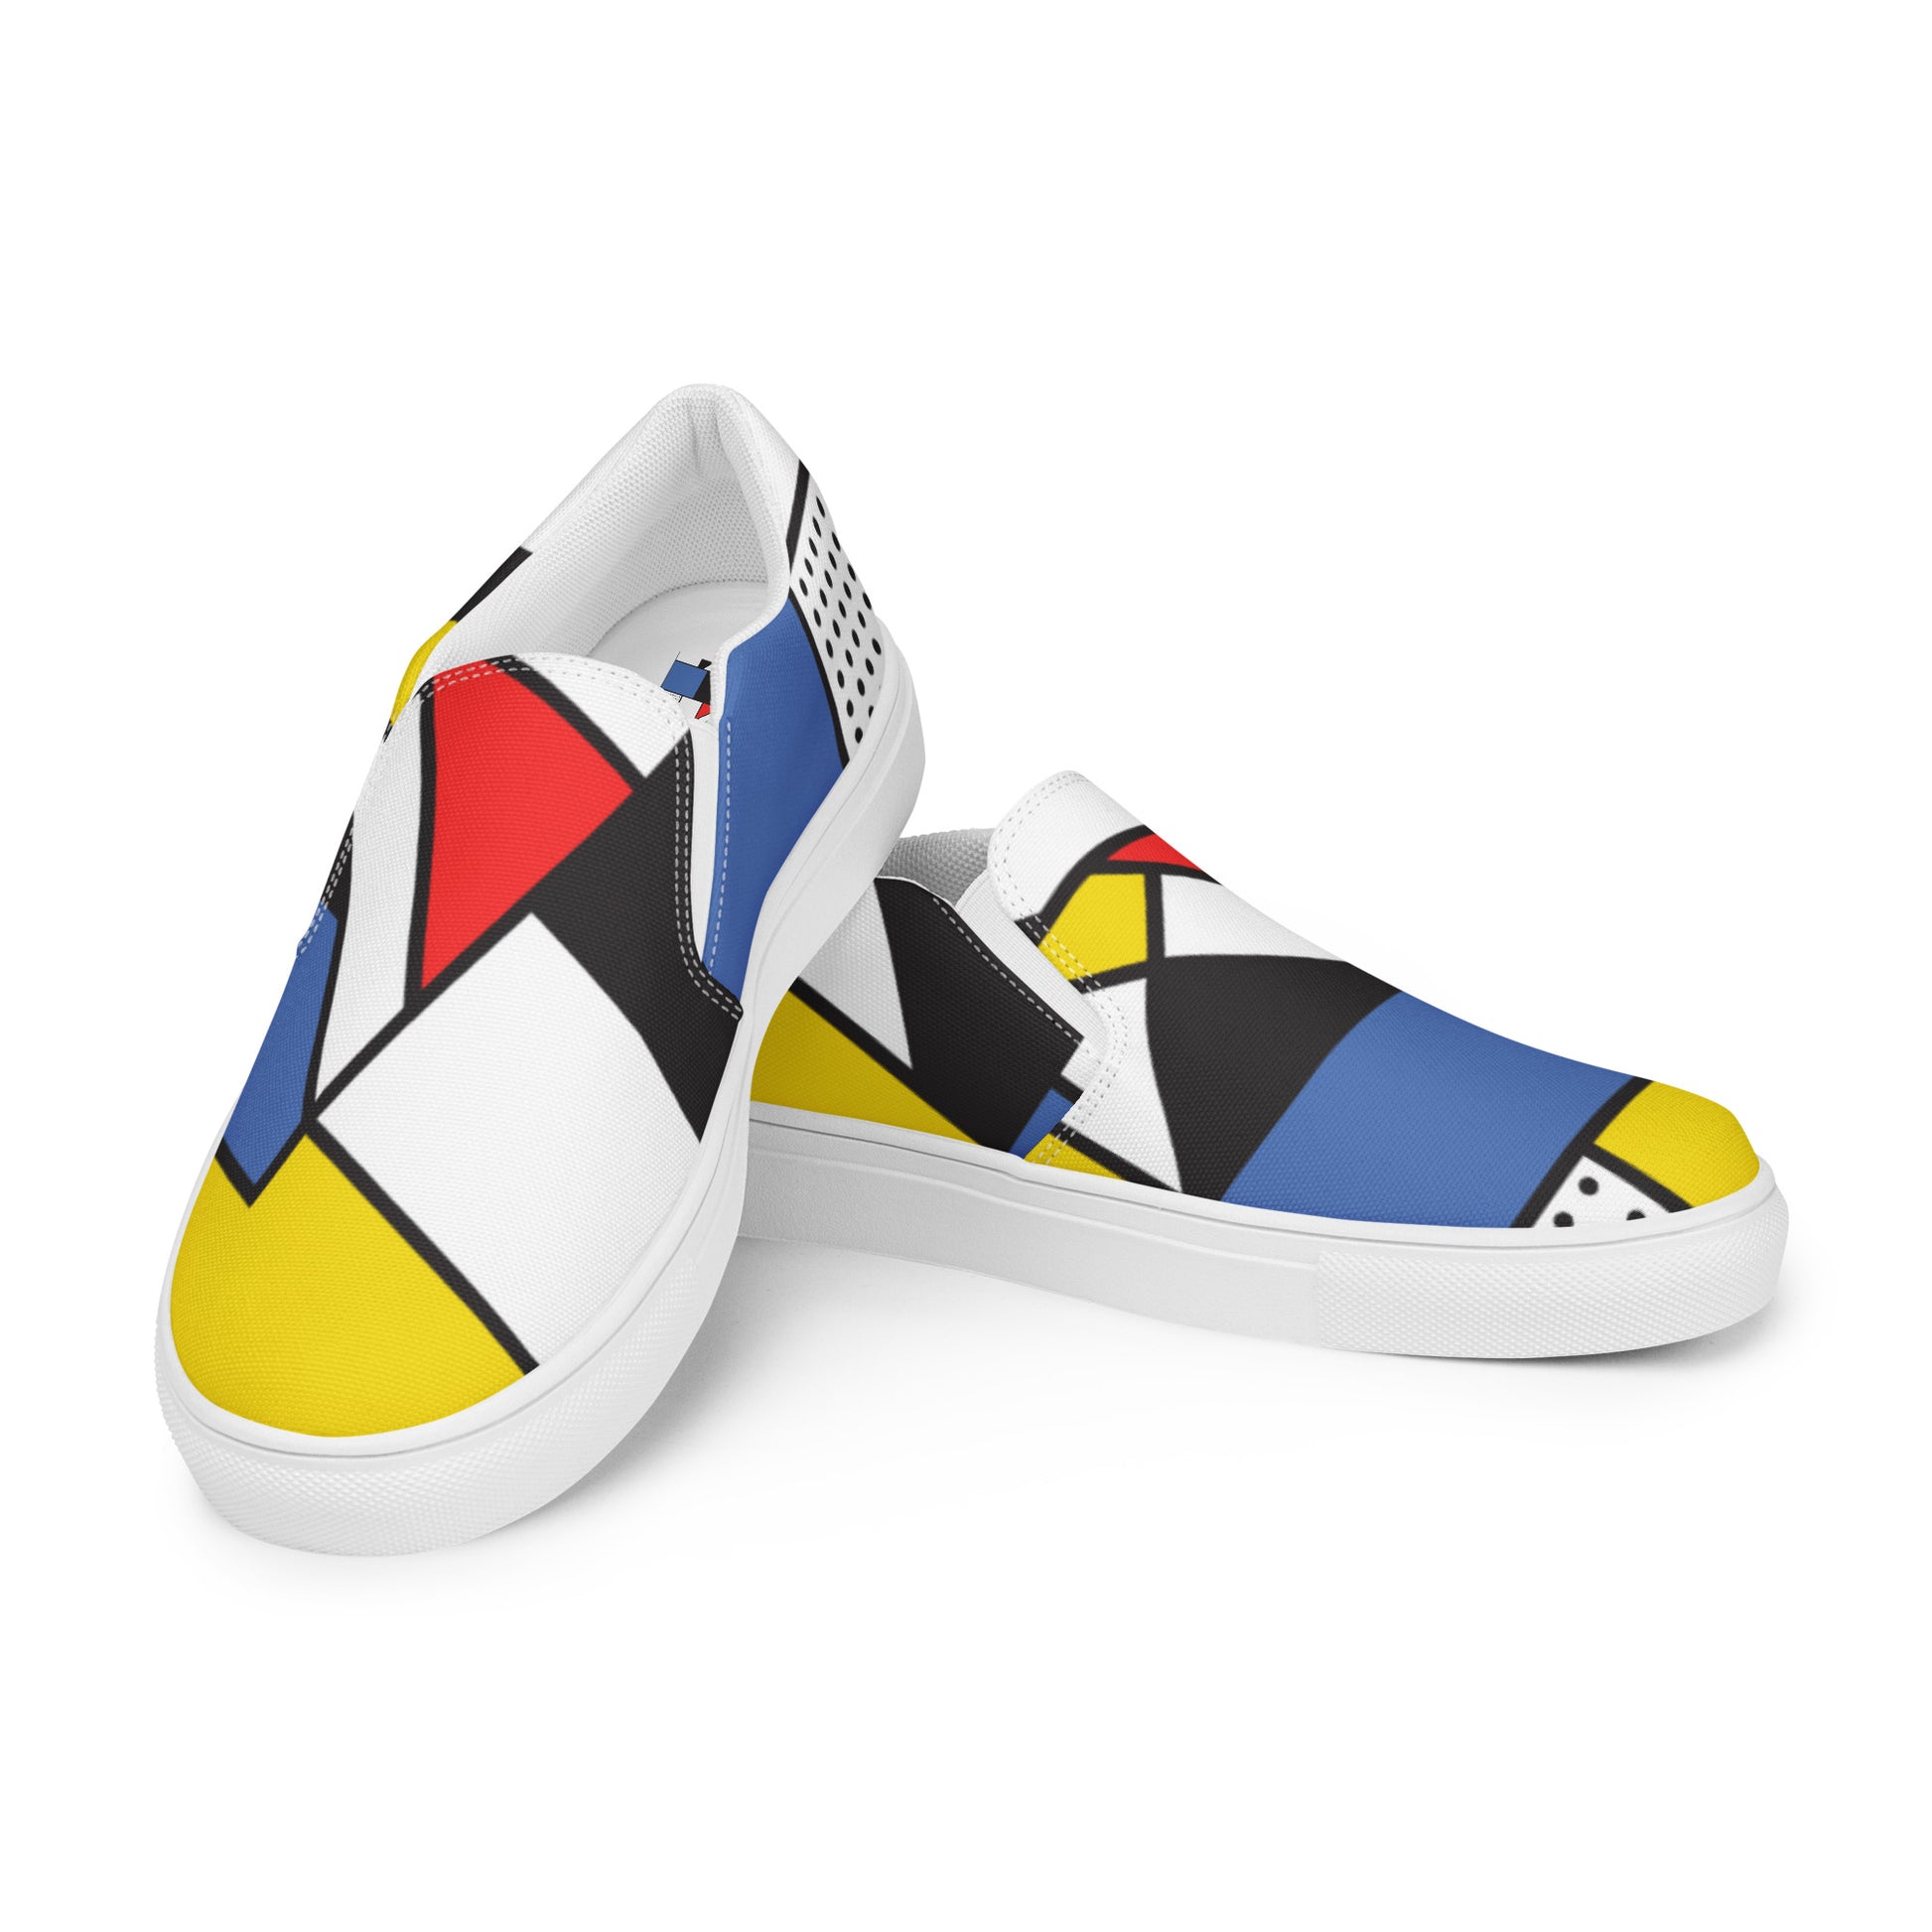 Women's slip-on canvas shoes with Mondrian design () – Great  people mind